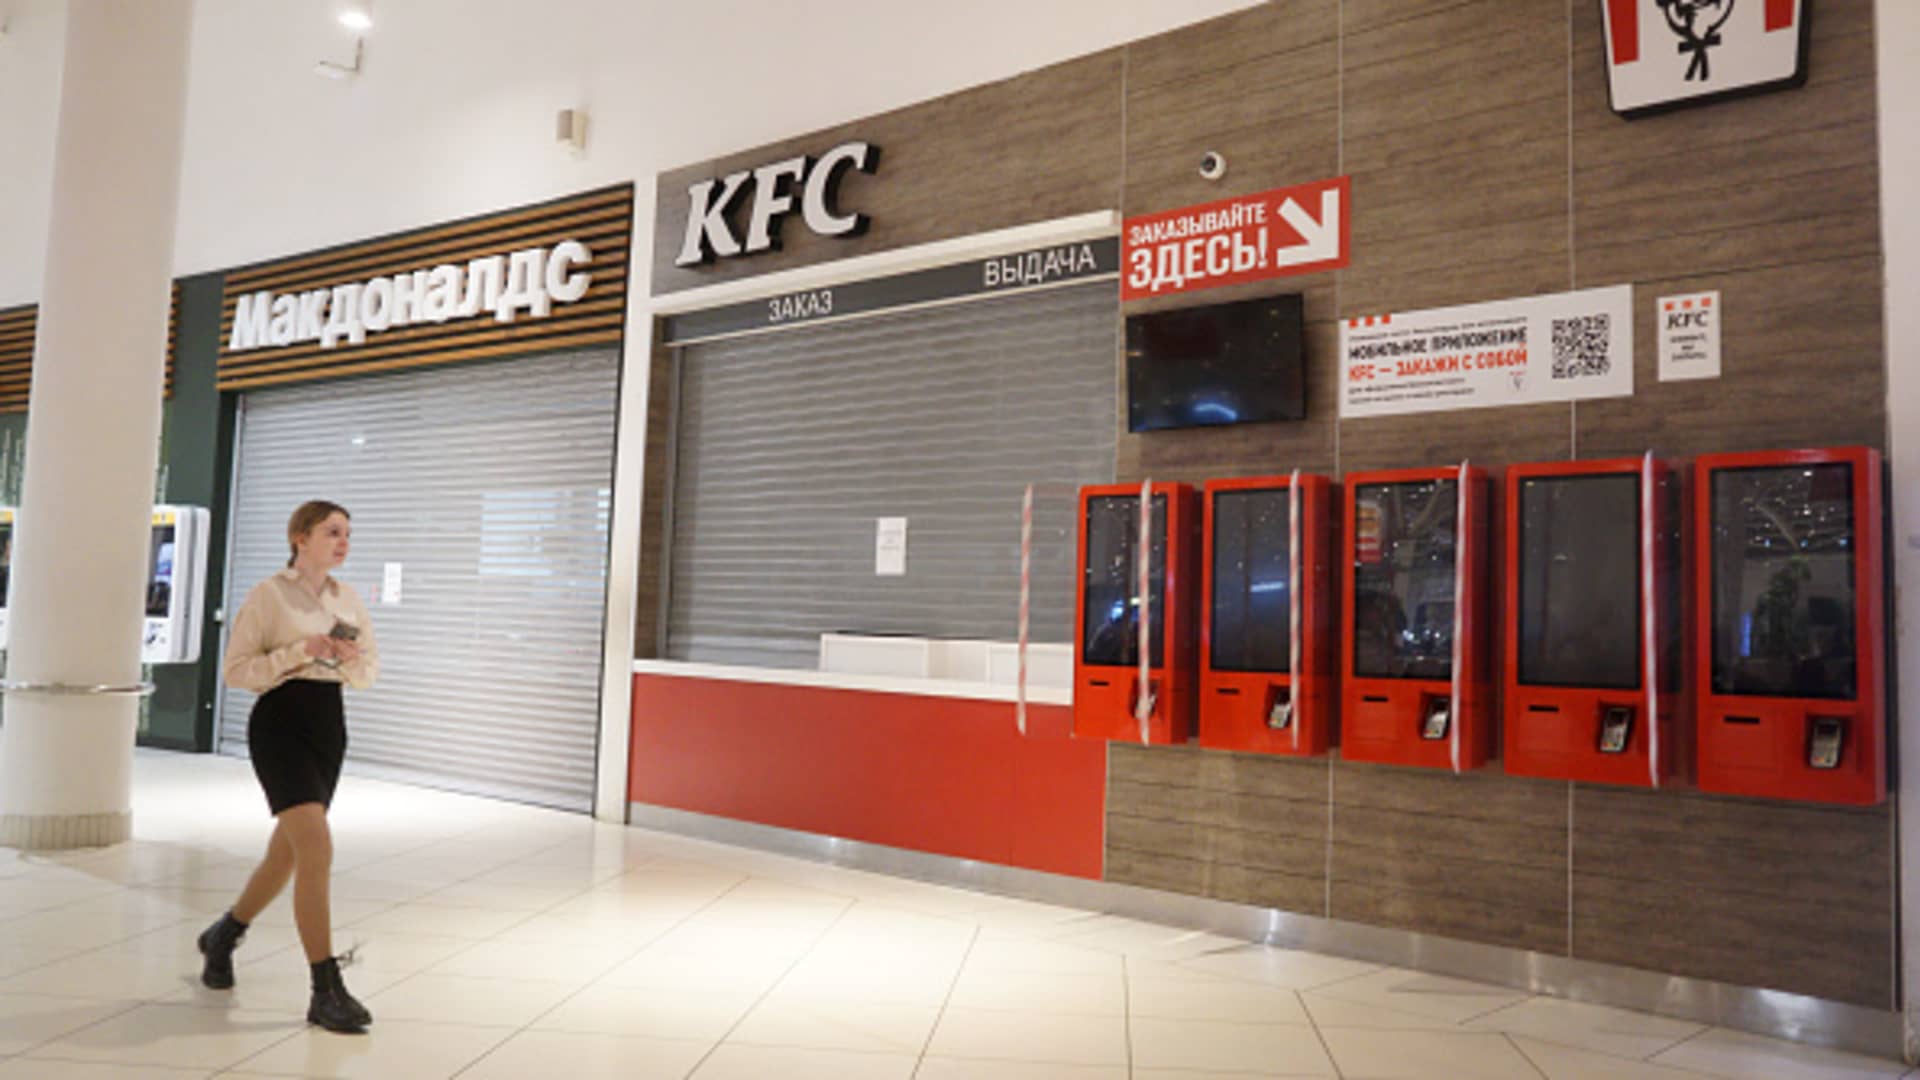 Yum Brands says it is close to selling its Russian KFC business – CNBC